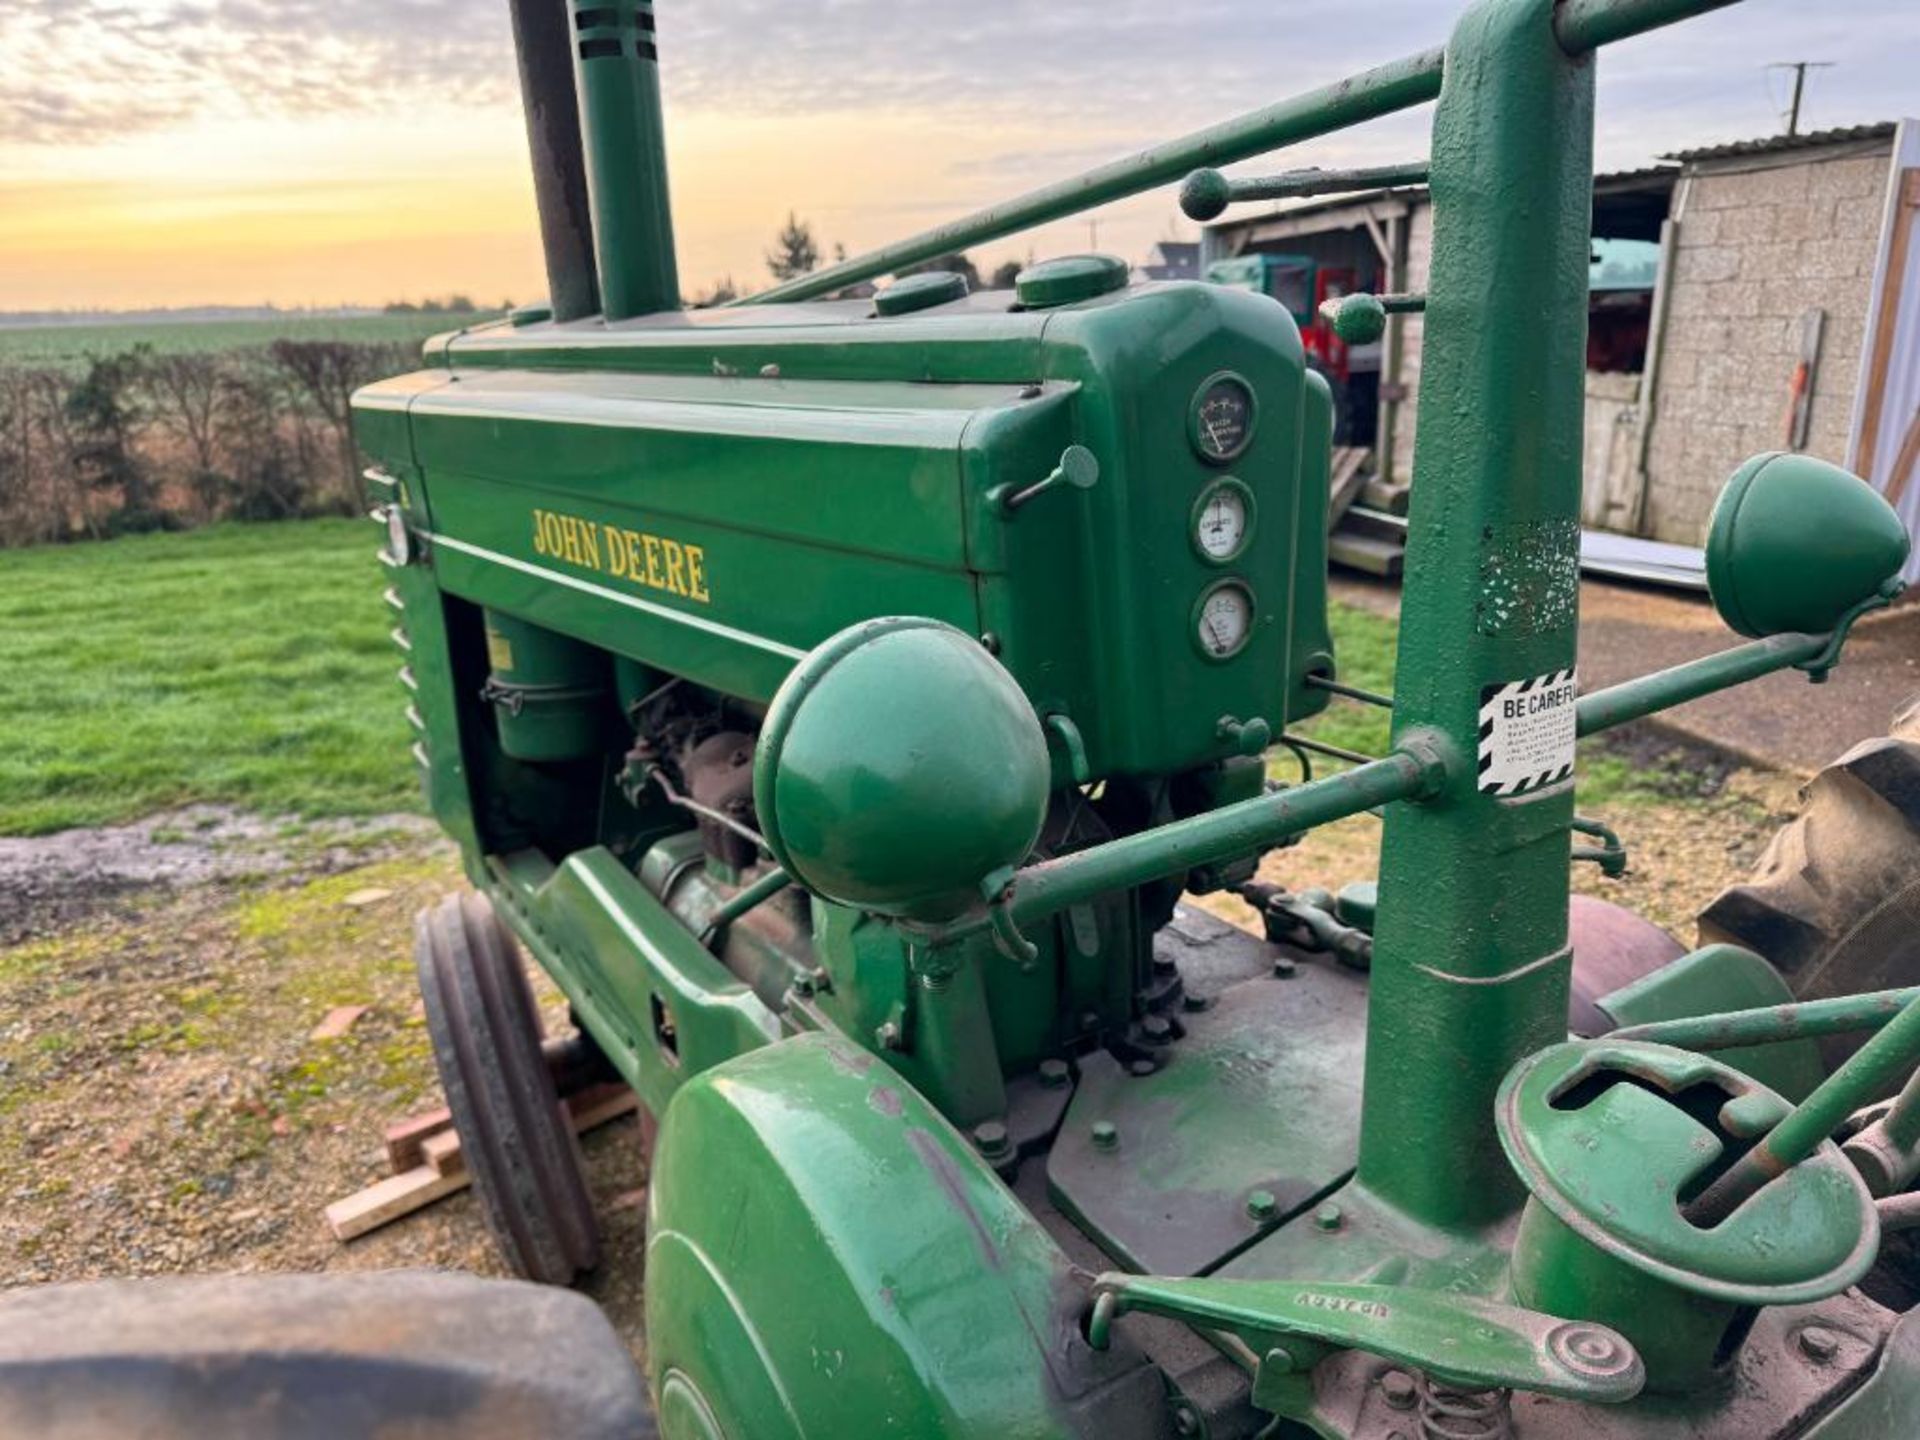 1948 John Deere Model A row crop tractor with side belt pulley, rear PTO and drawbar and twin front - Image 12 of 15